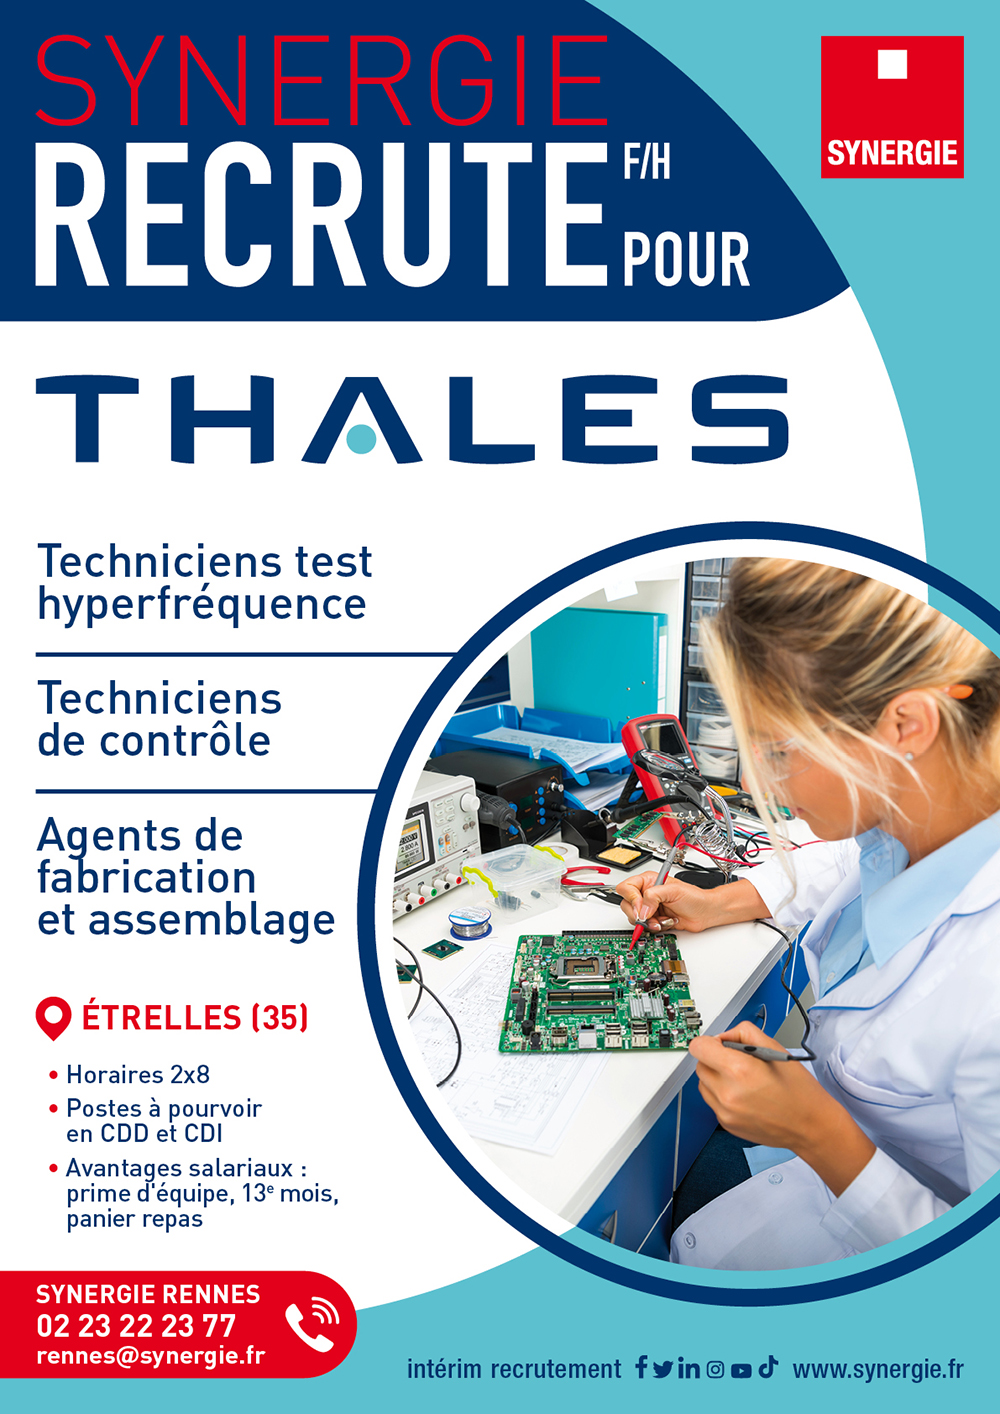 Poster Synergie recrute pour Thales